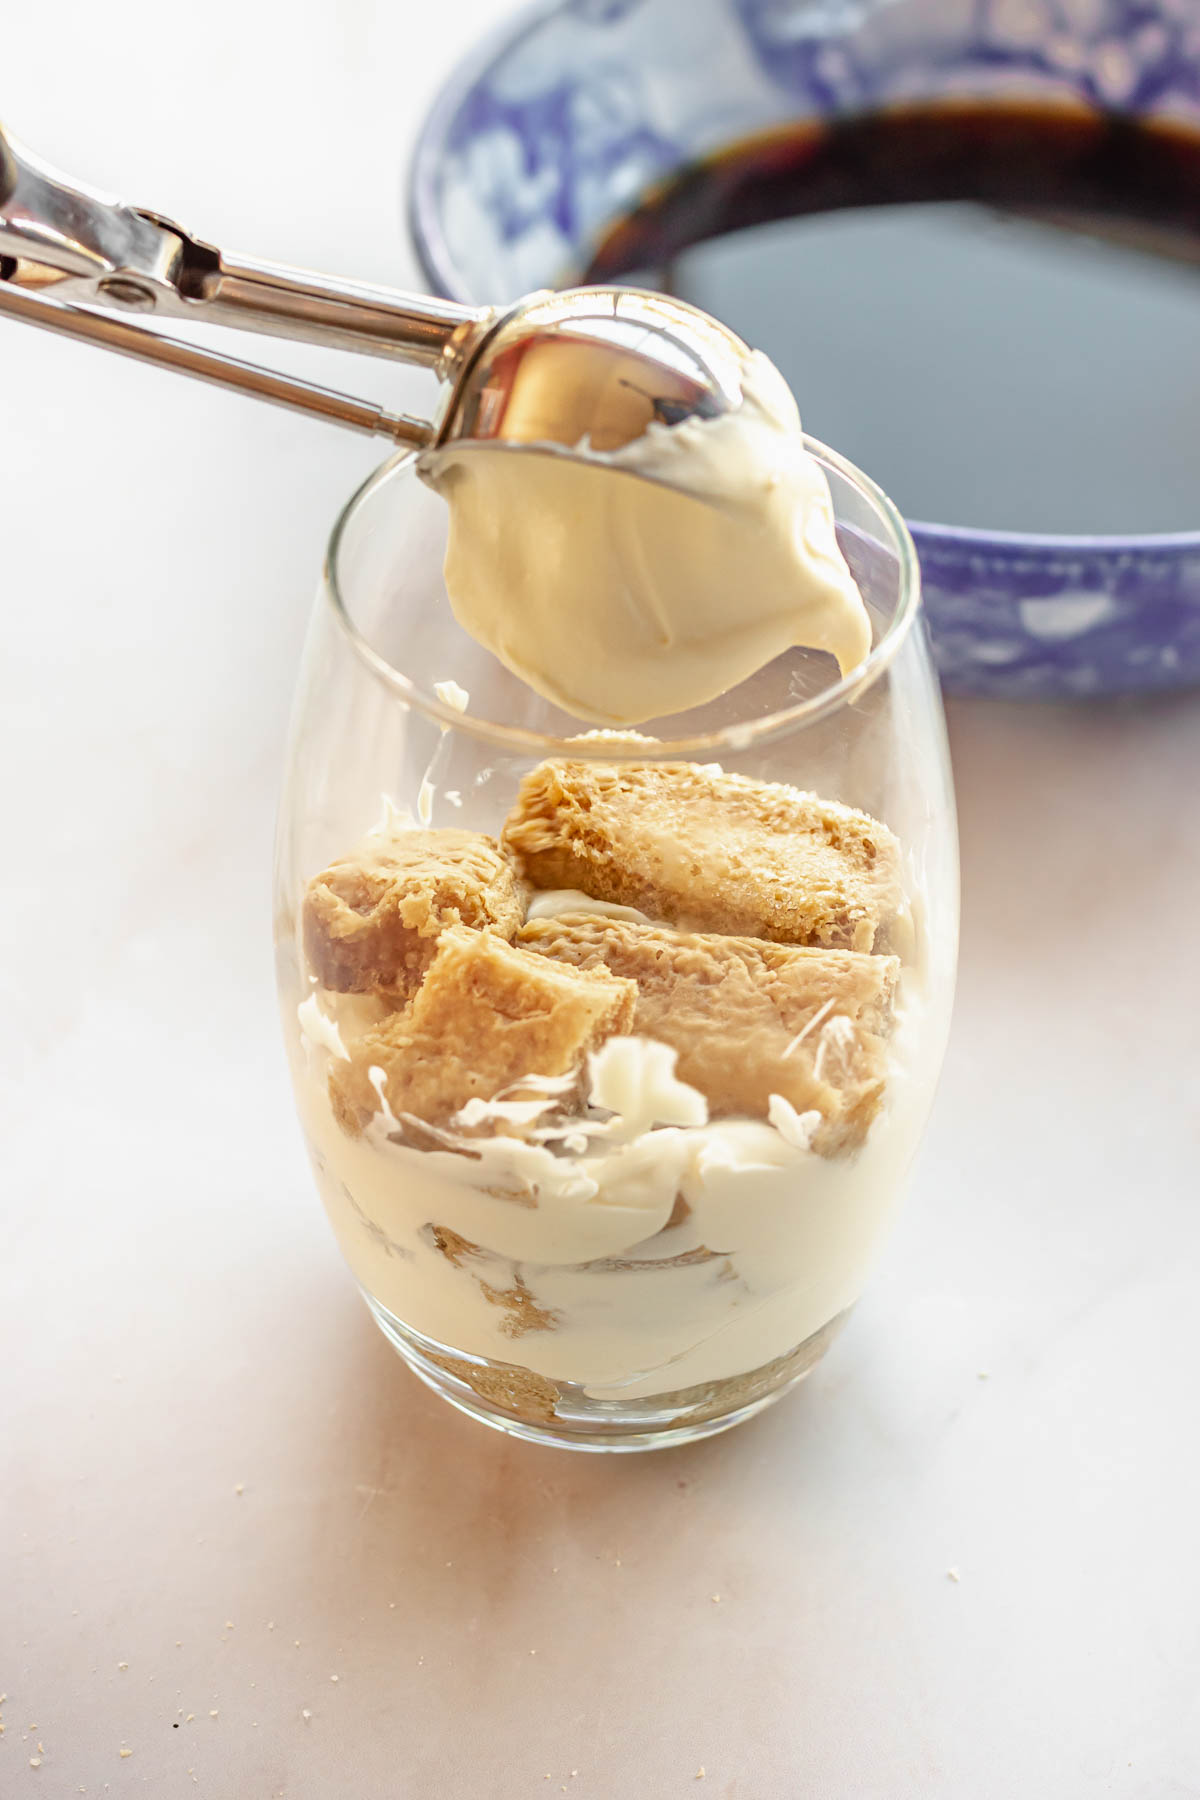 A cookie scoop adds a dollop of cream on top of lady fingers in a cup.